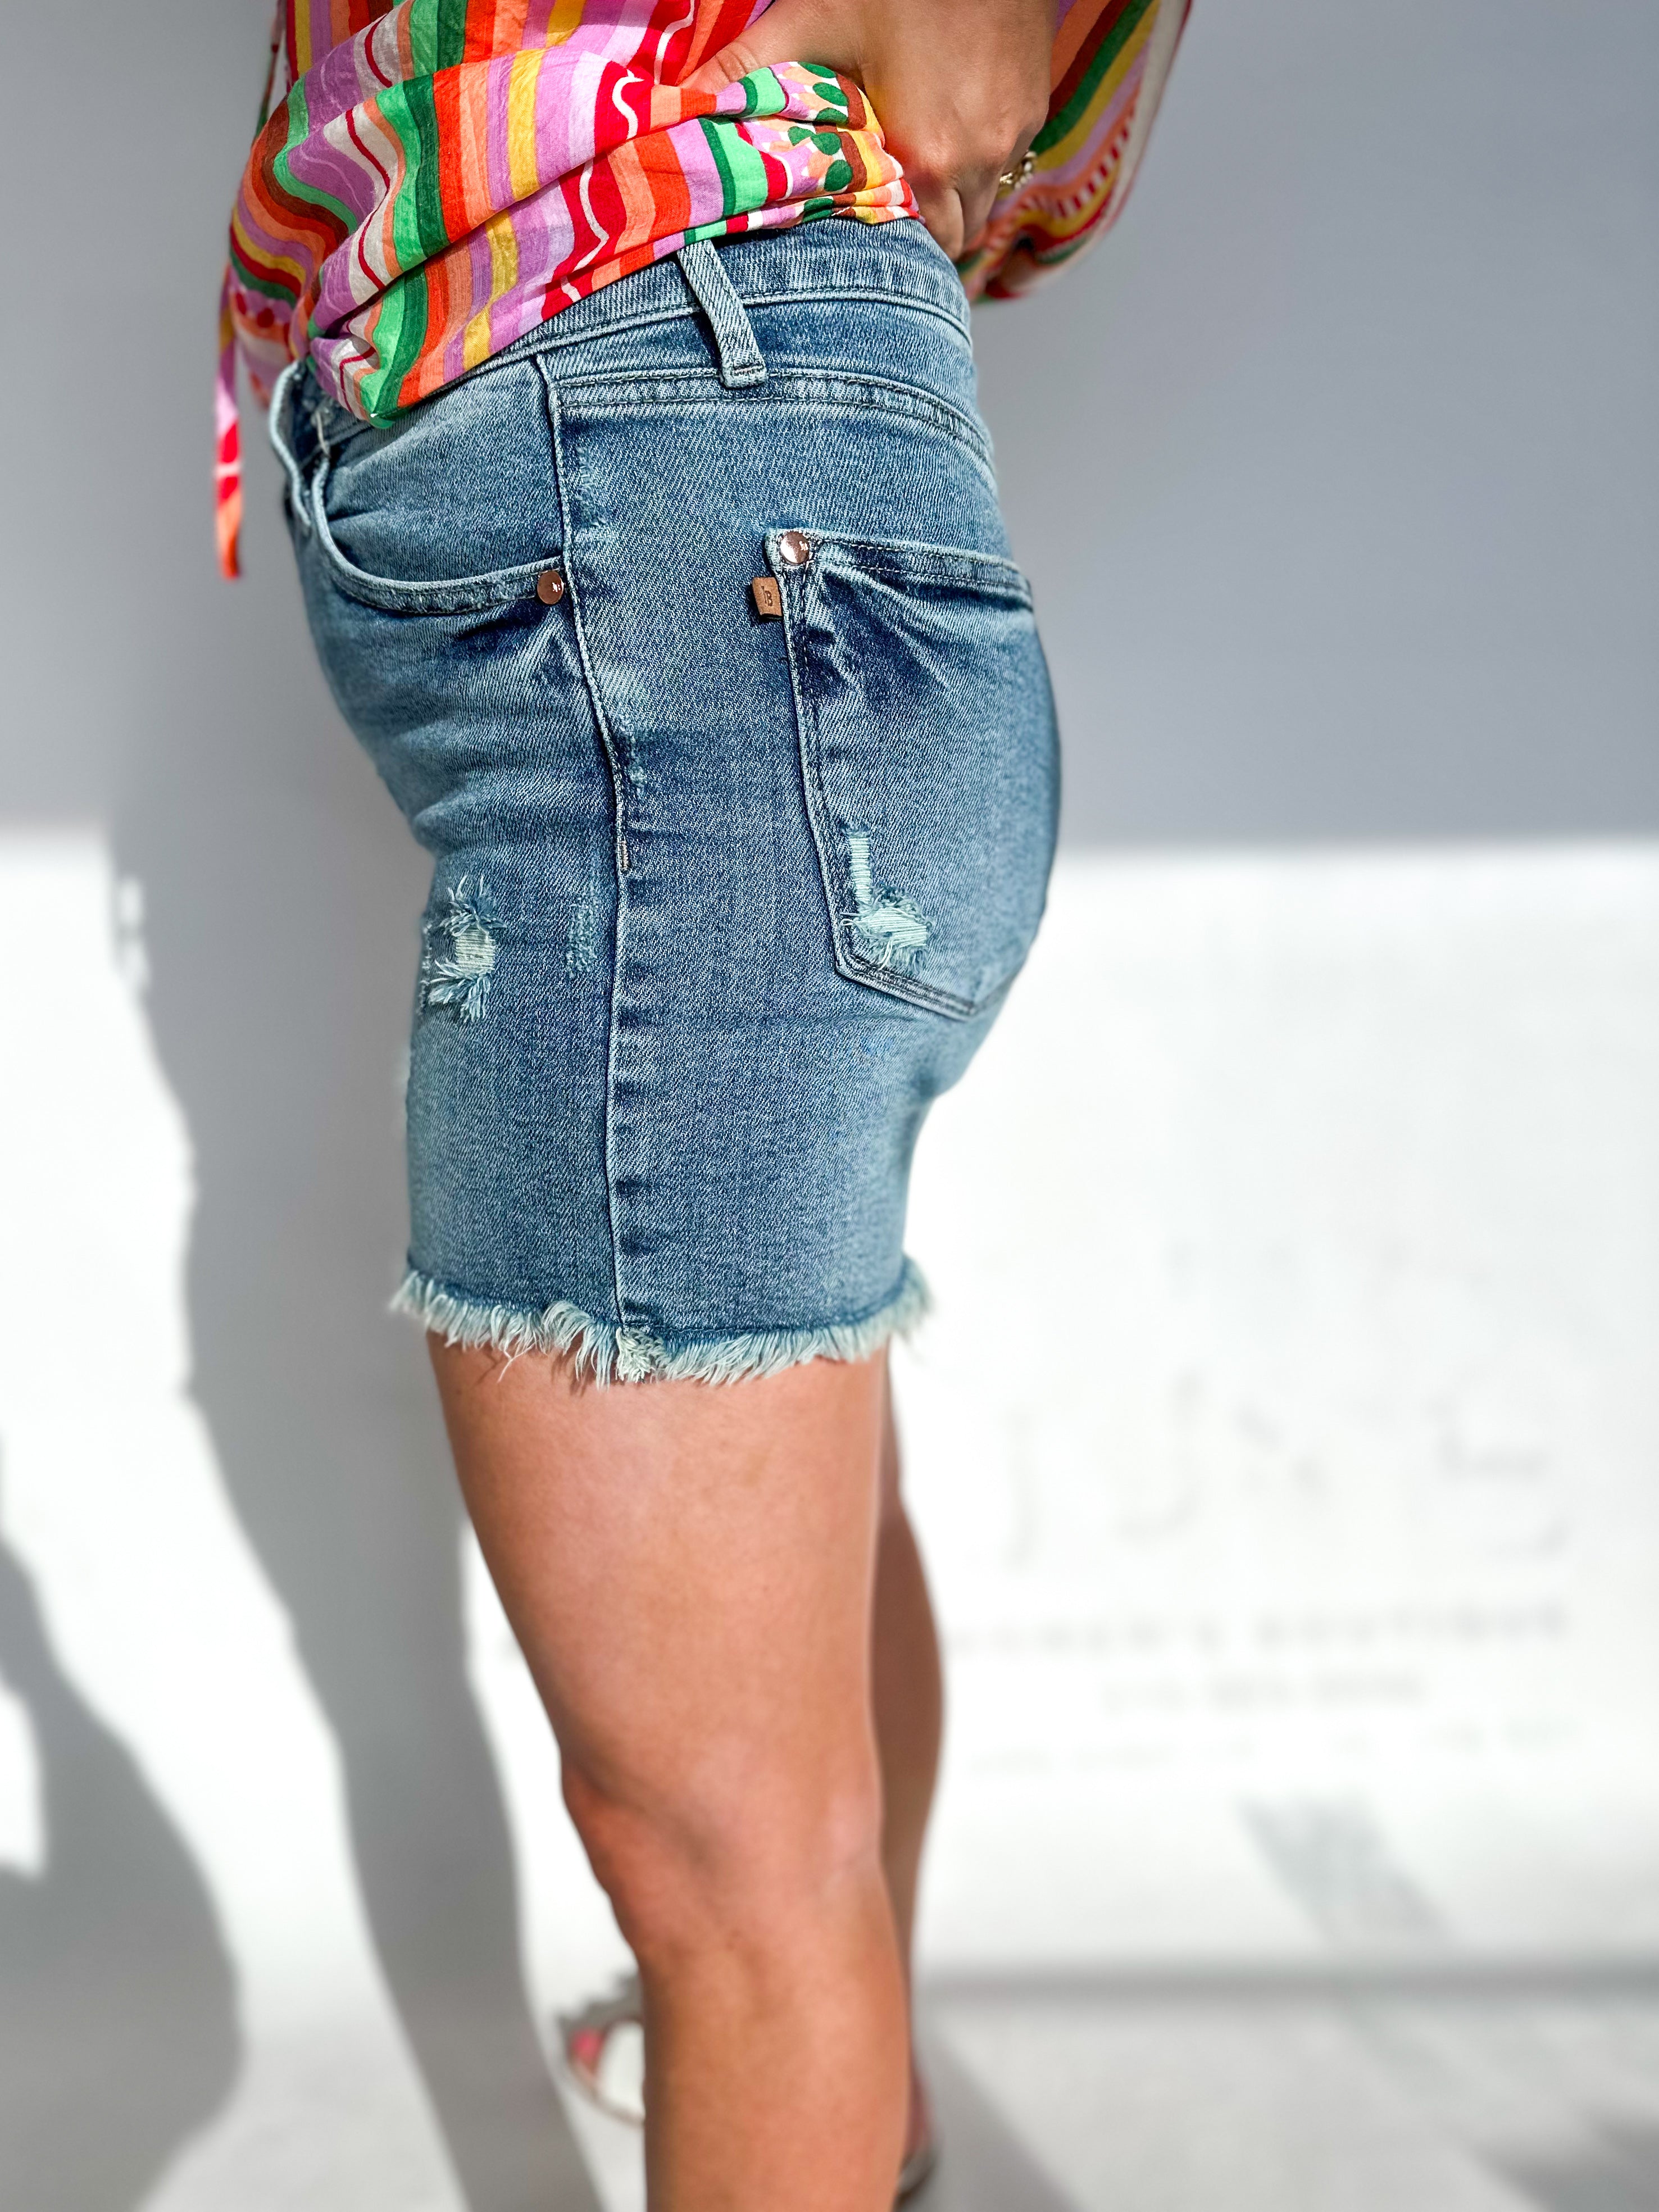 Judy Blue High Rise Light Wash Button Fly Shorts-410 Shorts/Skirts-JUDY BLUE-July & June Women's Fashion Boutique Located in San Antonio, Texas